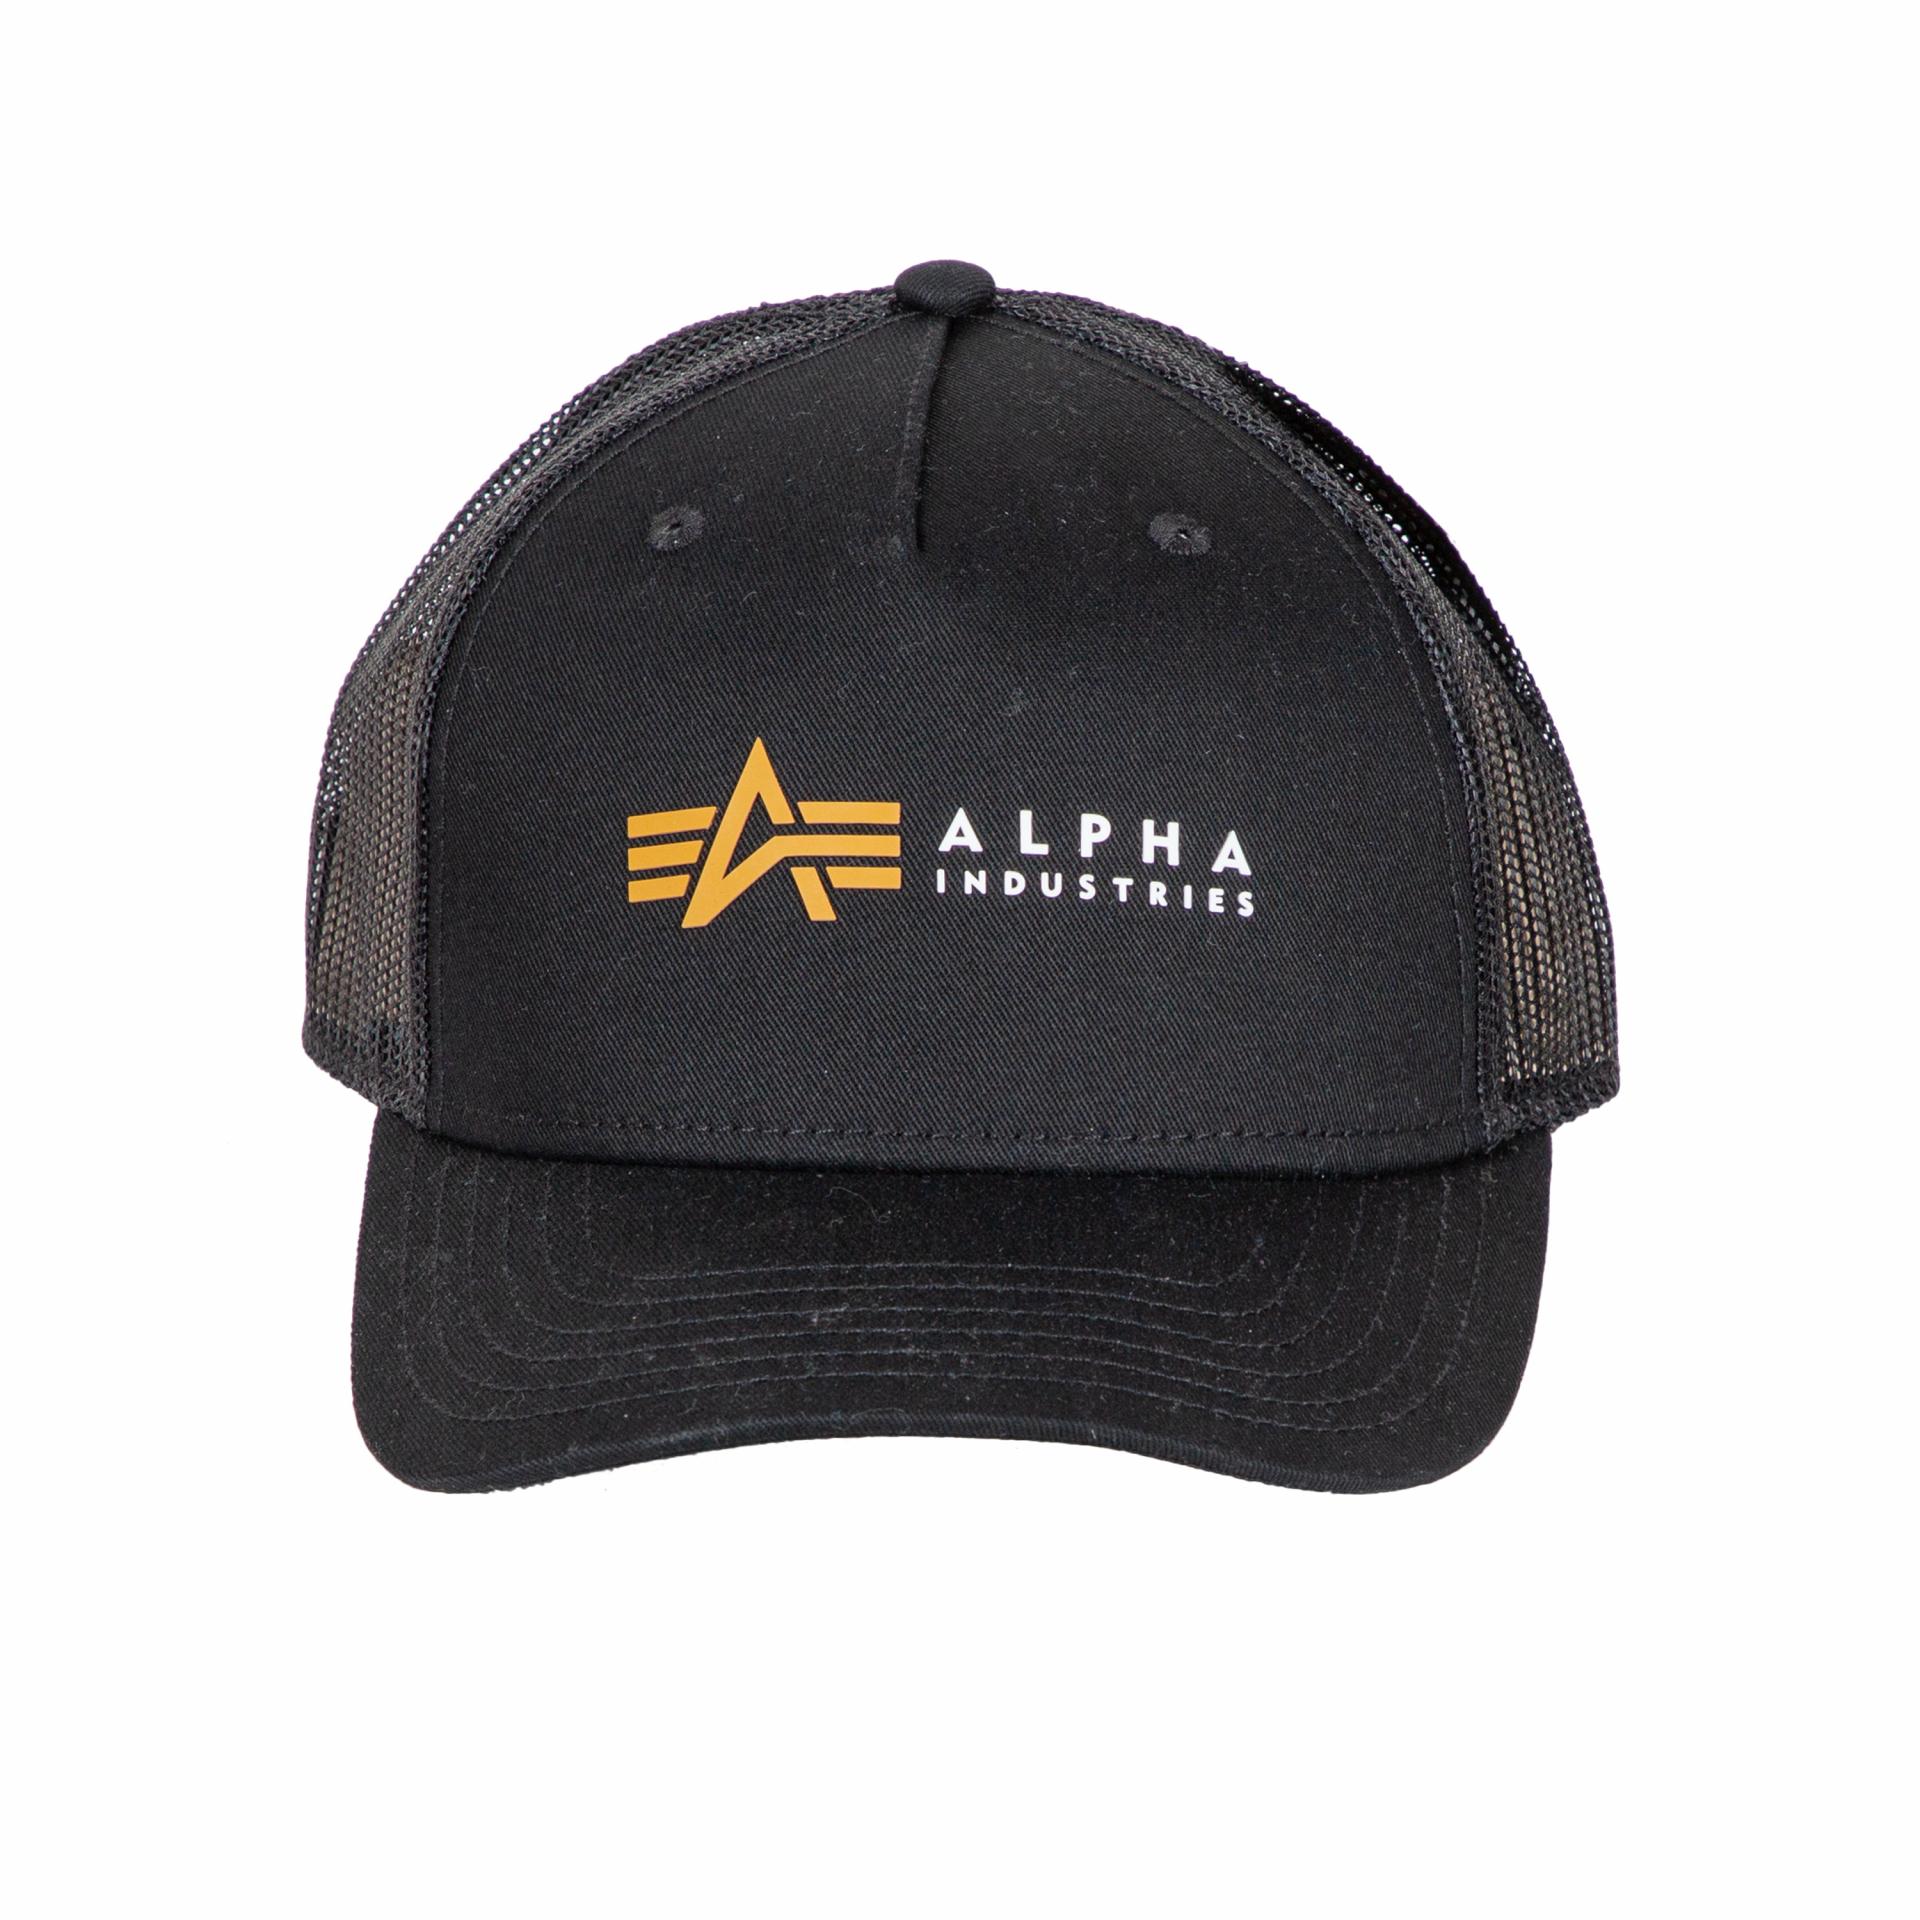 CAPS/HATS Archives - Alpha Industries Cyprus